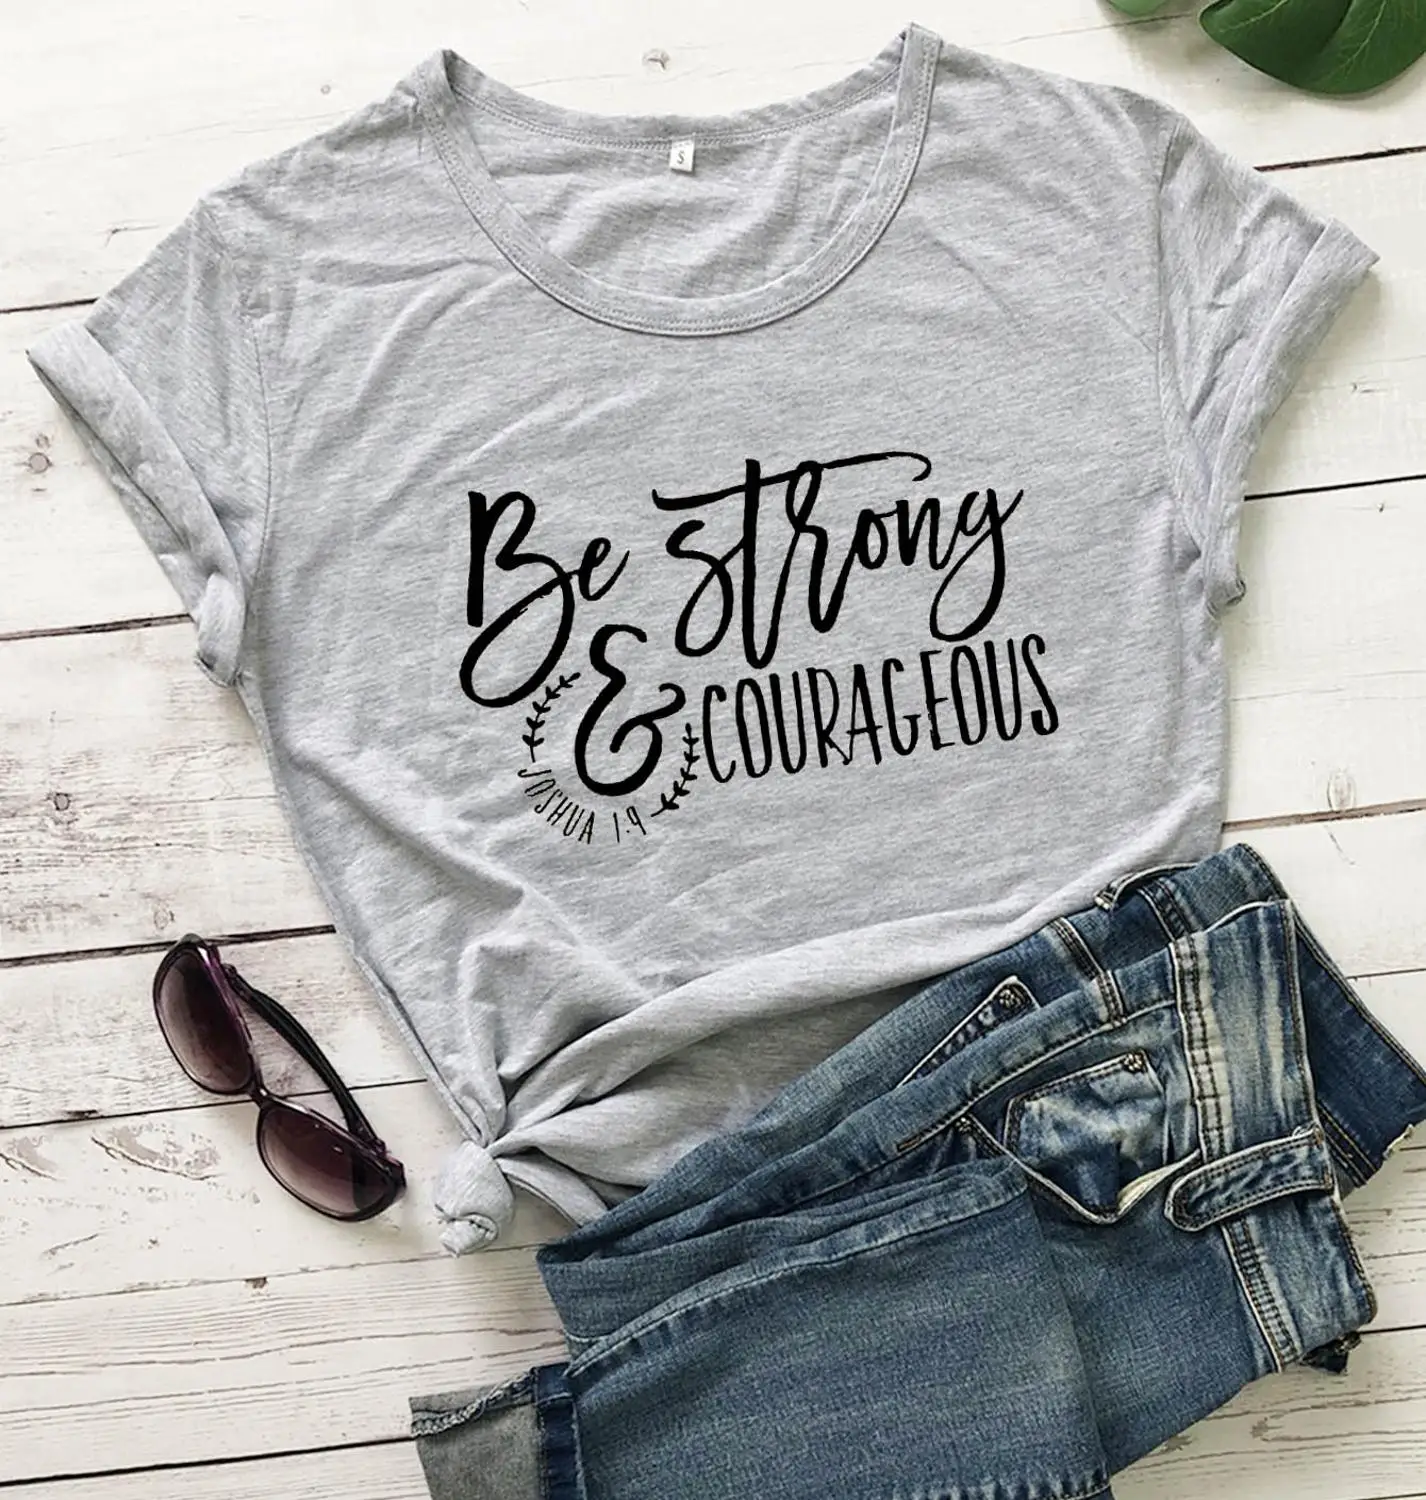 

Be Strong and Courageous Shirt fashion religion slogan quote Christian Bible baptism personality tees grunge tumblr tops-M514